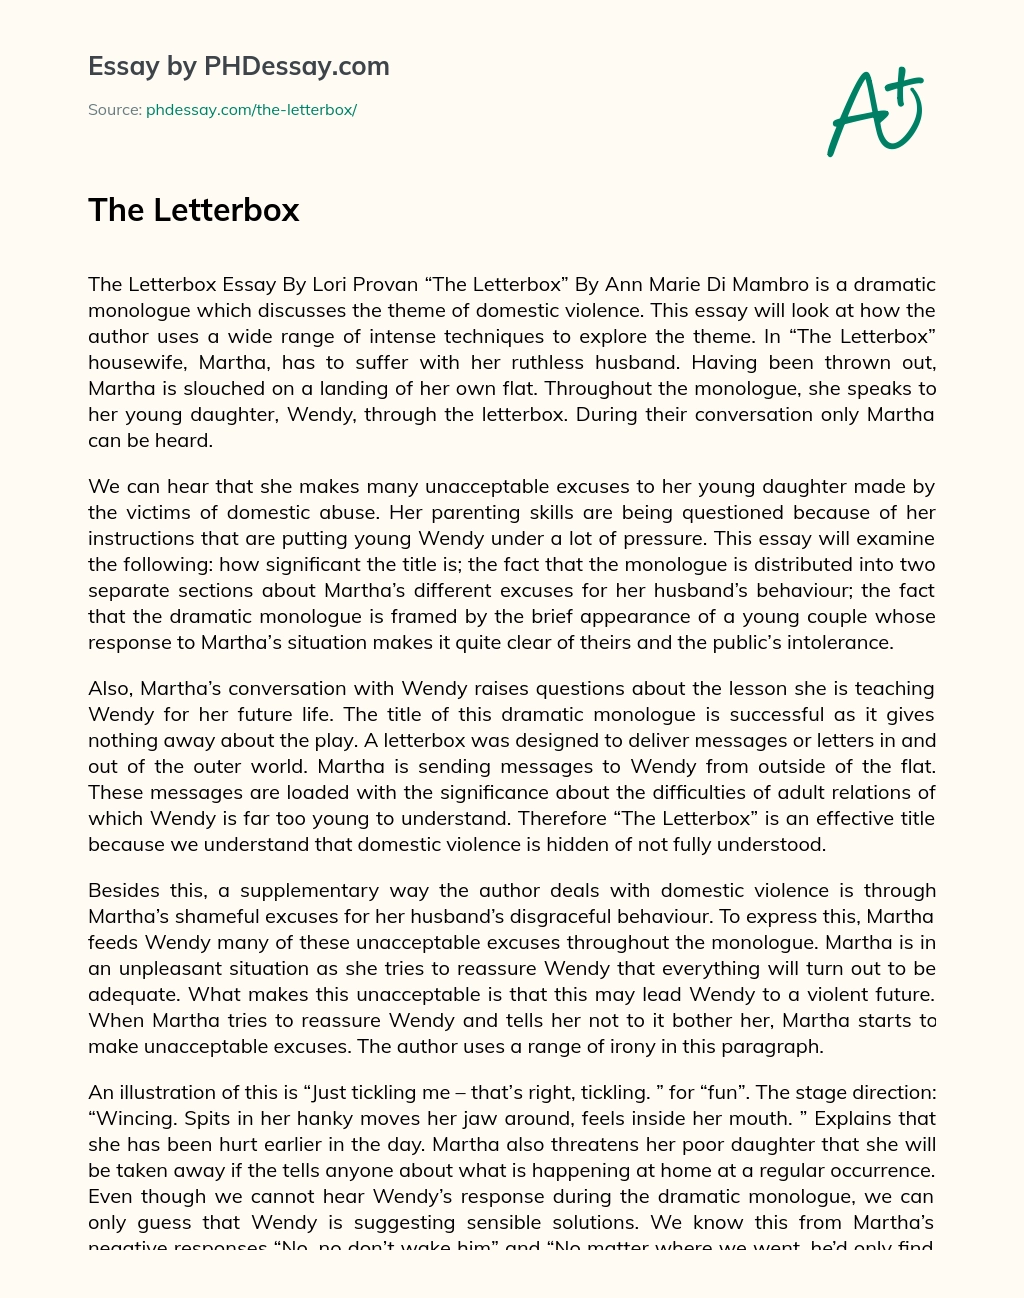 The Letterbox essay